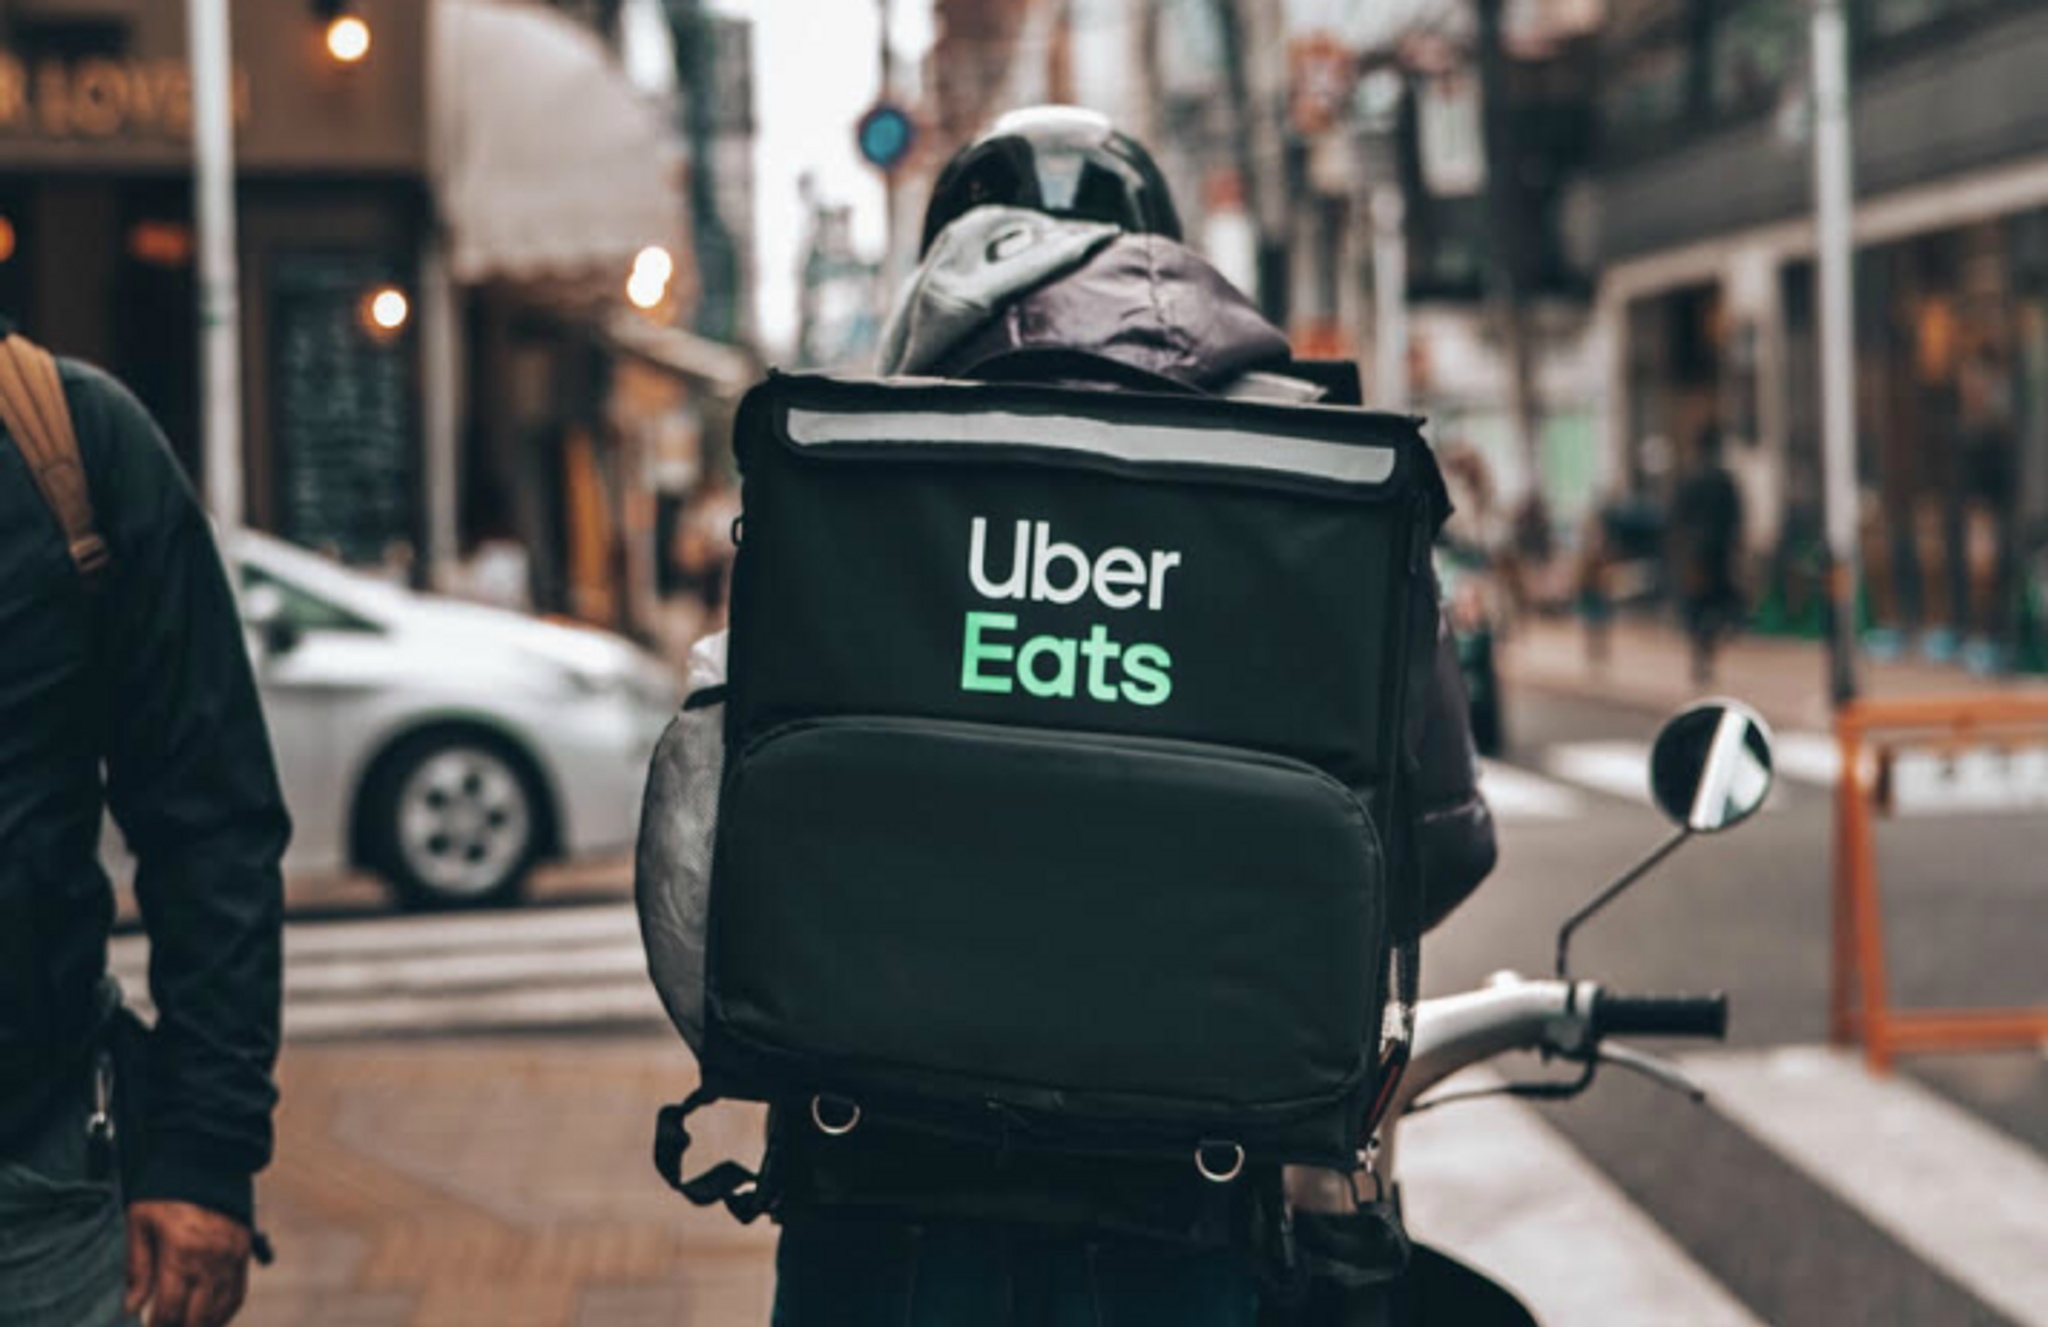 Uber Eats makes it easy to aid struggling restaurants